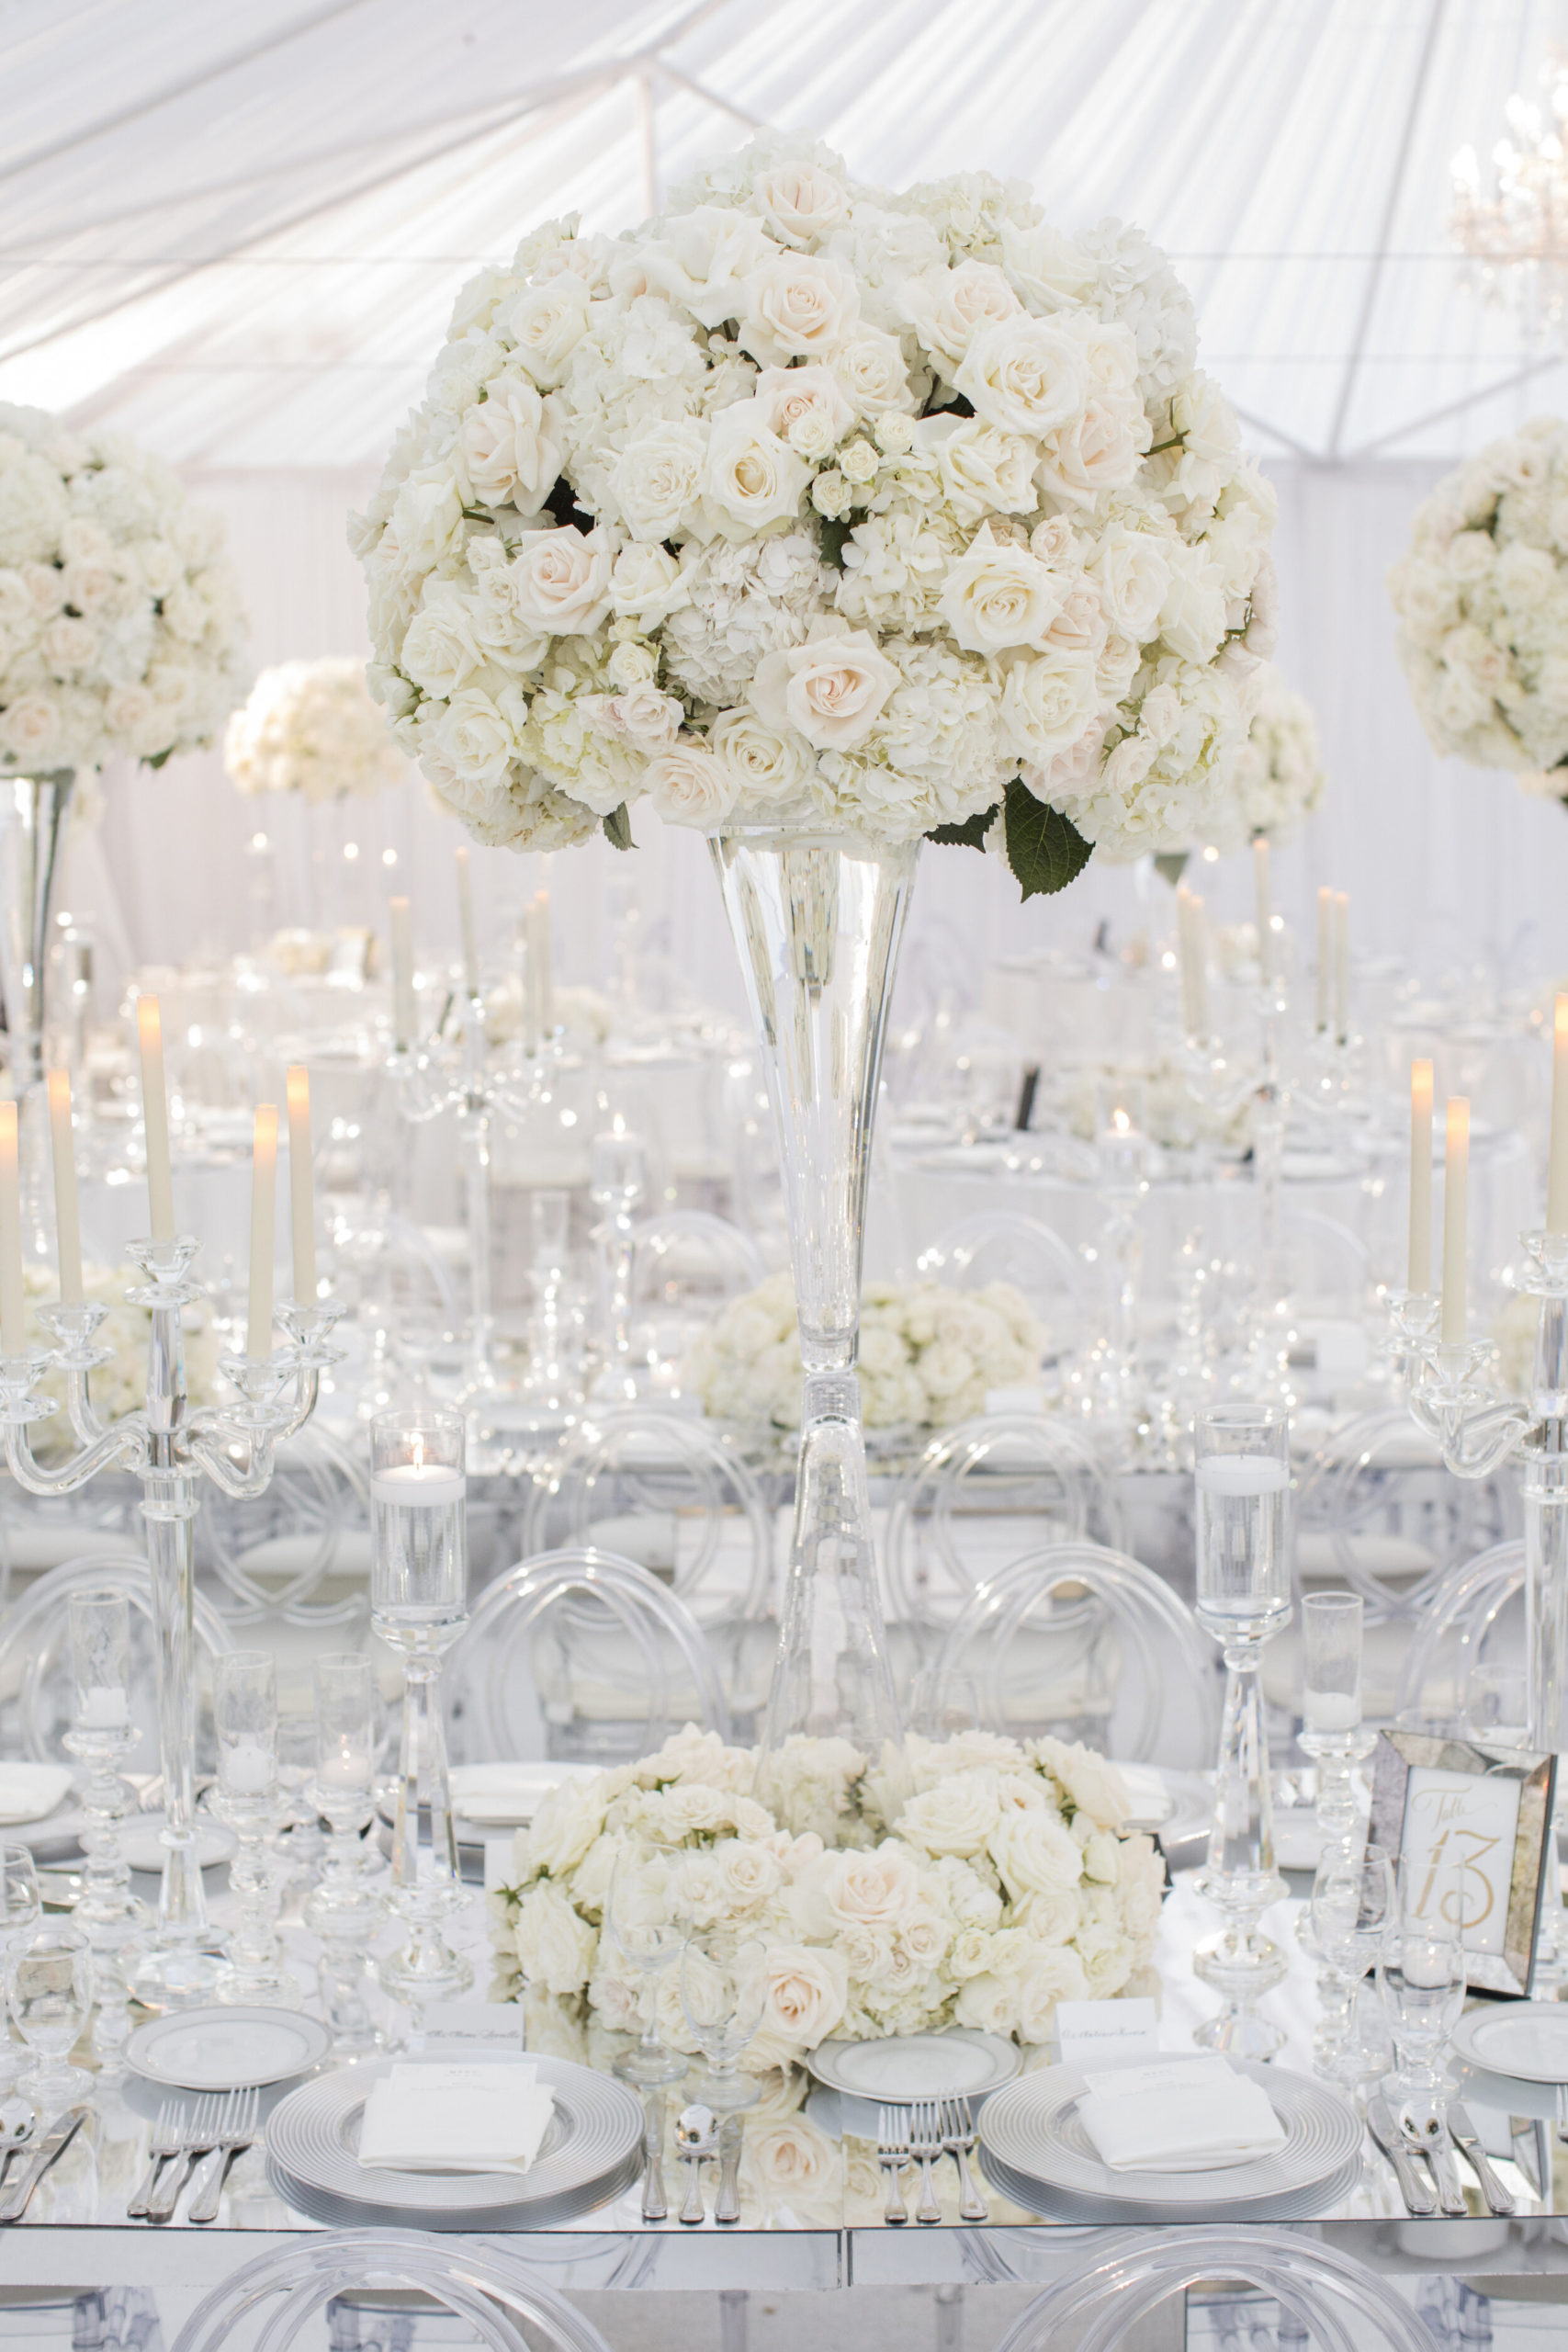 Wedding Inspiration - We would switch the silver to gold